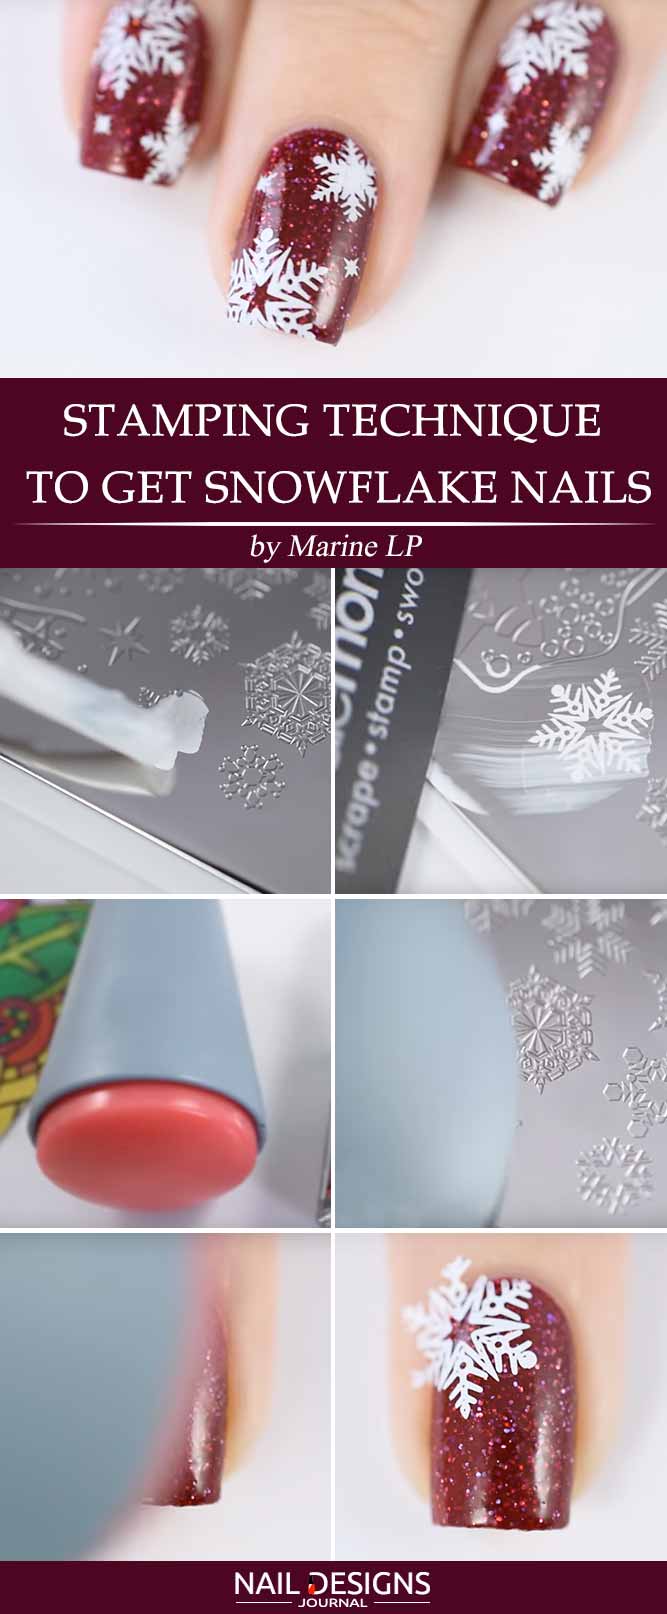 Stamping Technique to Get Snowflake Nails